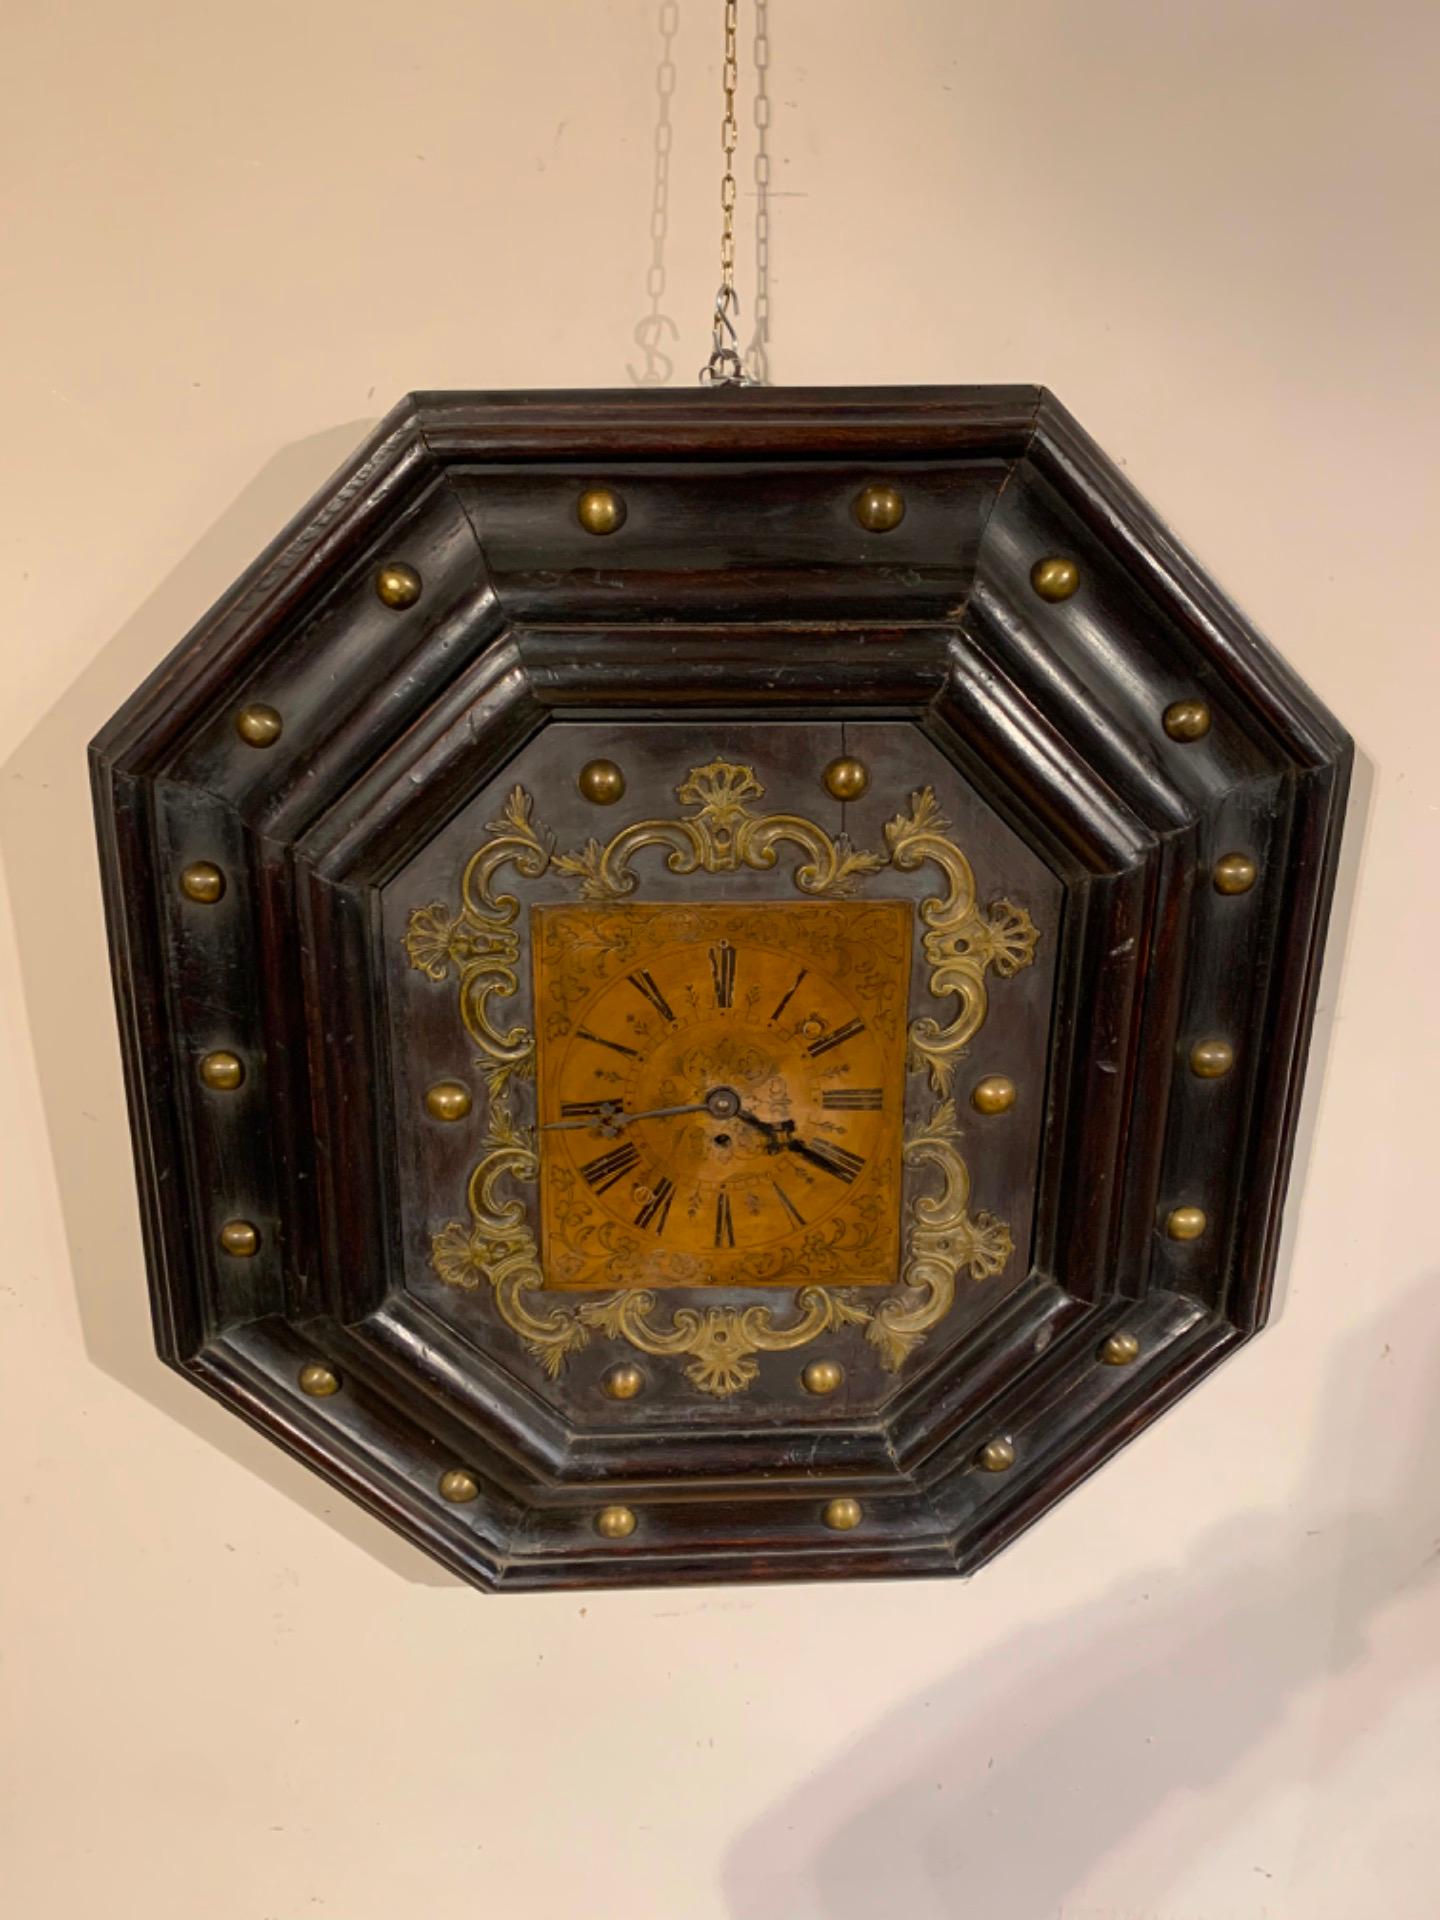 Beautiful octagonal shaped wall clock made of solid walnut with patinated bronze finishes and semi-cylindrical head nails.
Rectangular chiseled dial, daily winding without alarm and suspended pendulum.
Tuscan manufacture from the first half of the